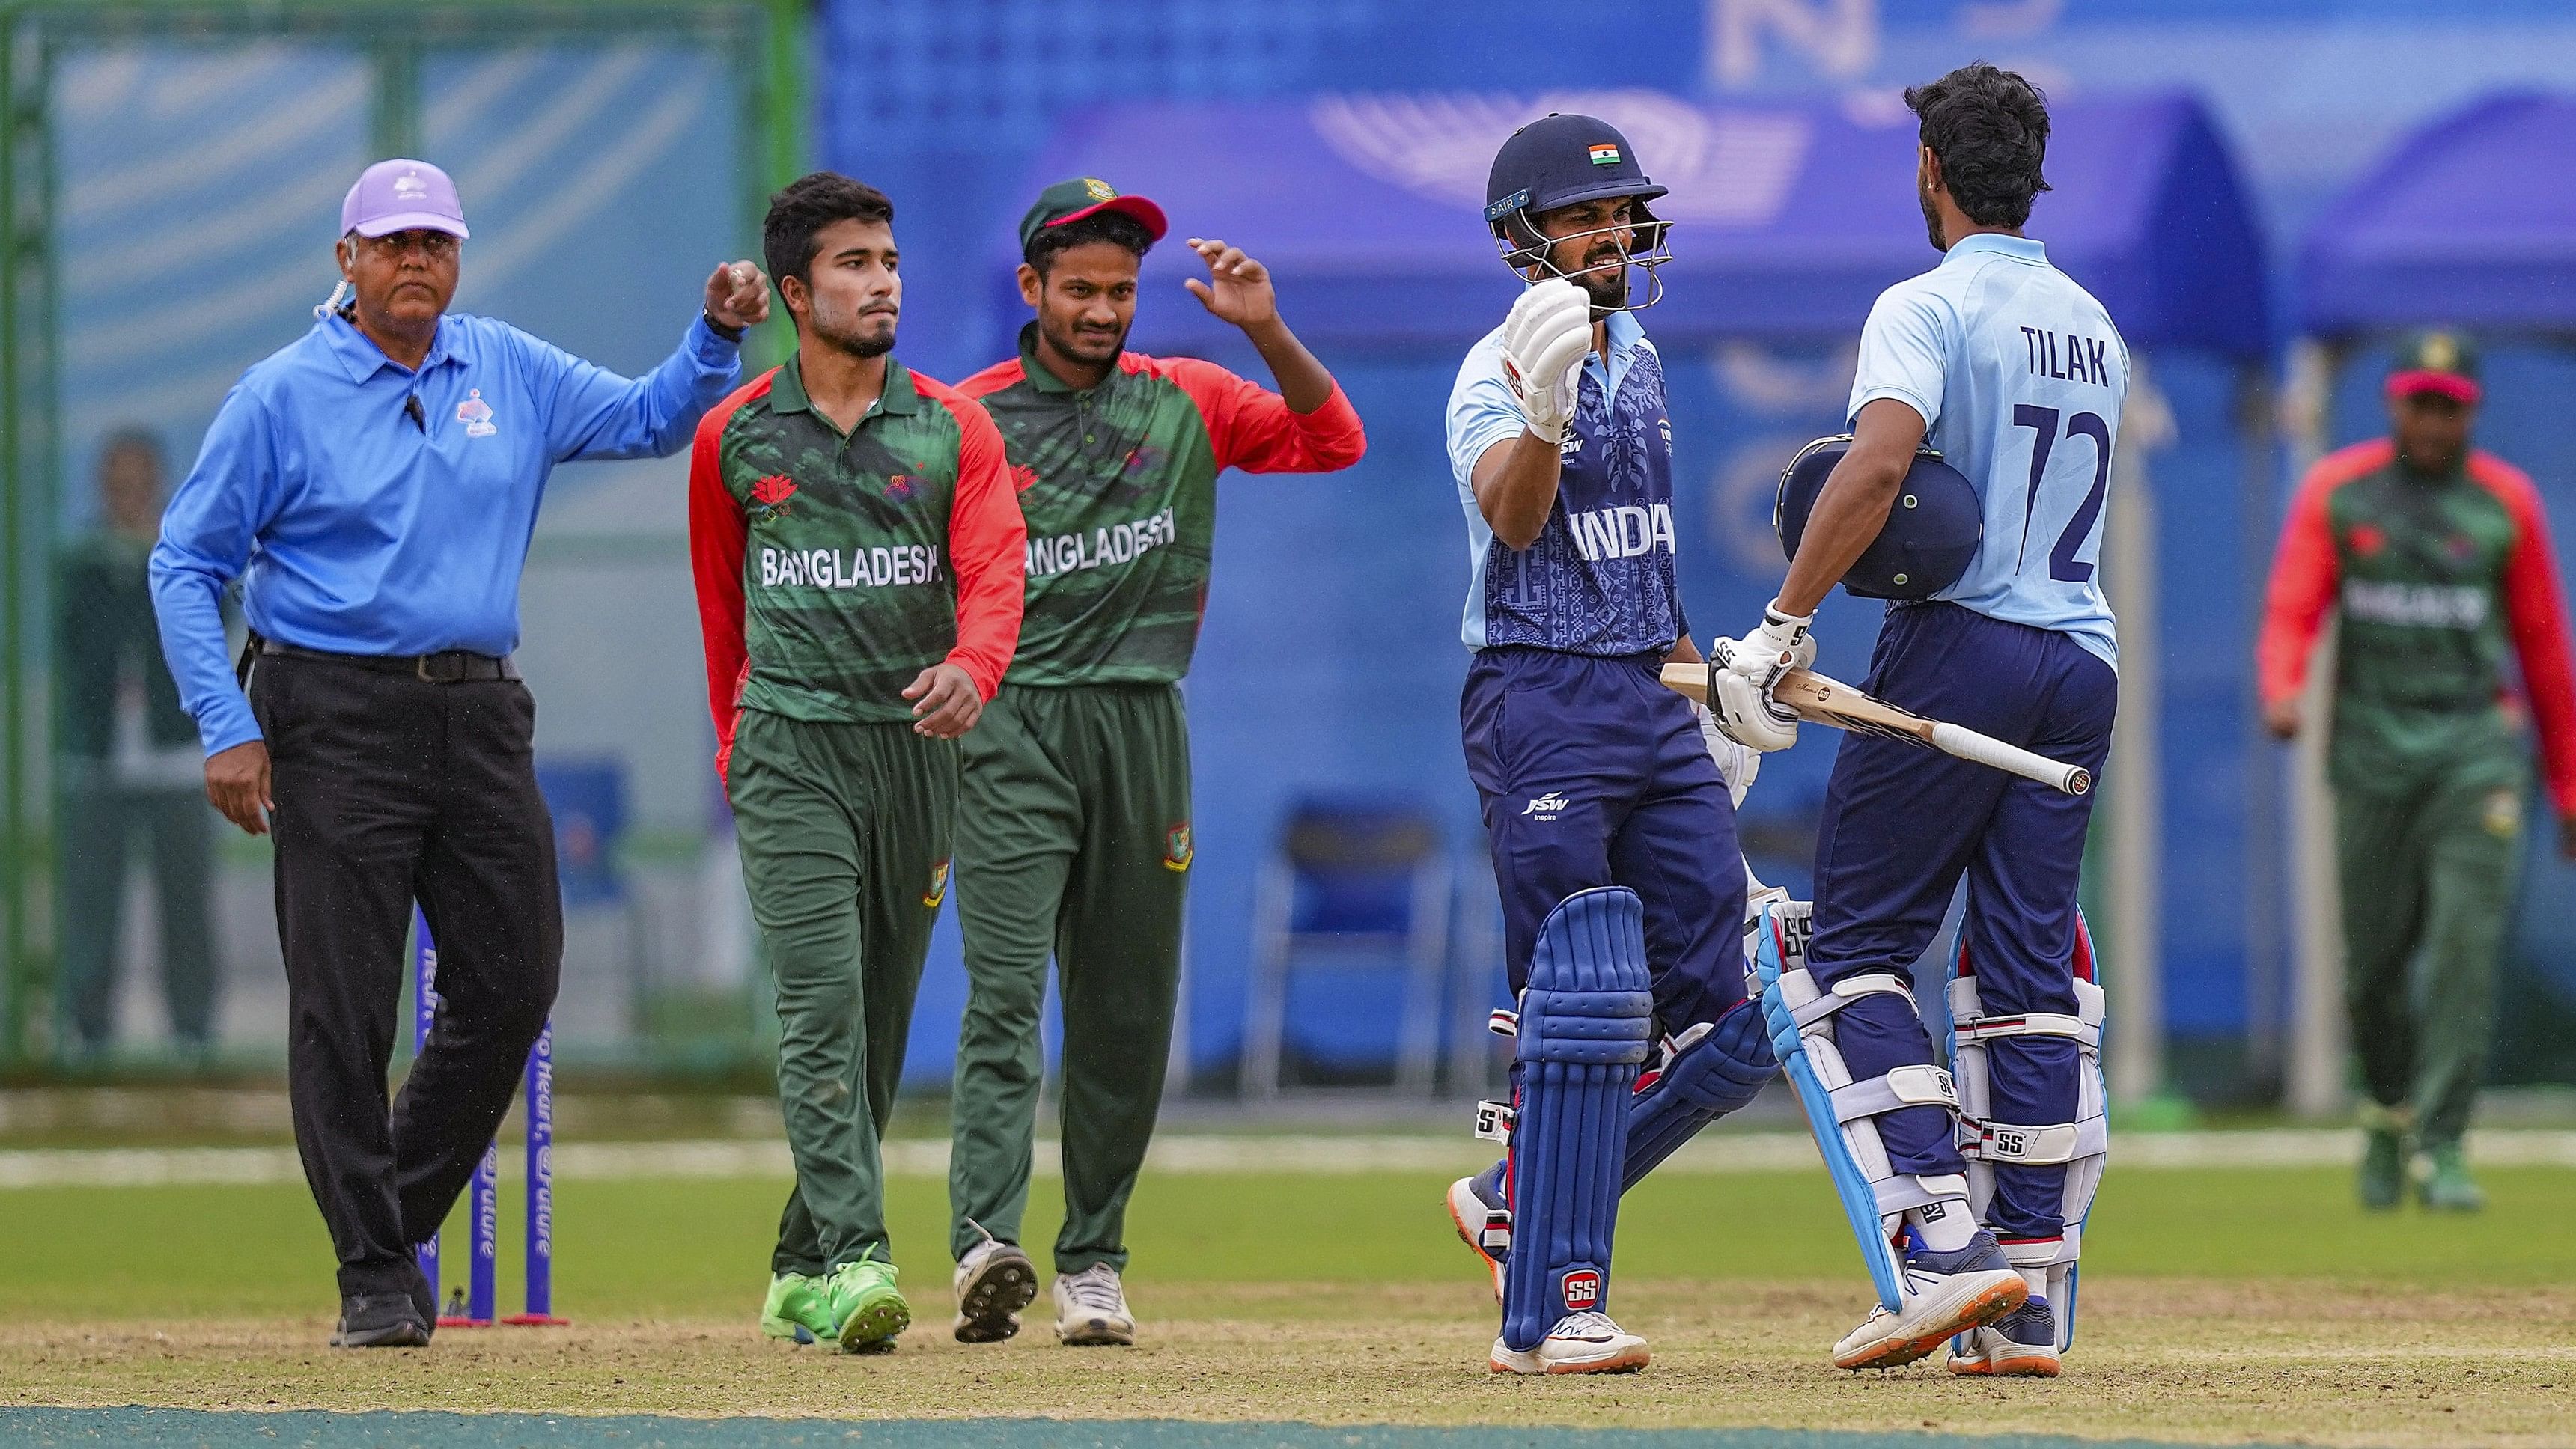 <div class="paragraphs"><p> India's Tilak Varma and R Gaikwad celebrate their win in men's cricket semifinal match between India and Bangladesh at the 19th Asian Games.</p></div>